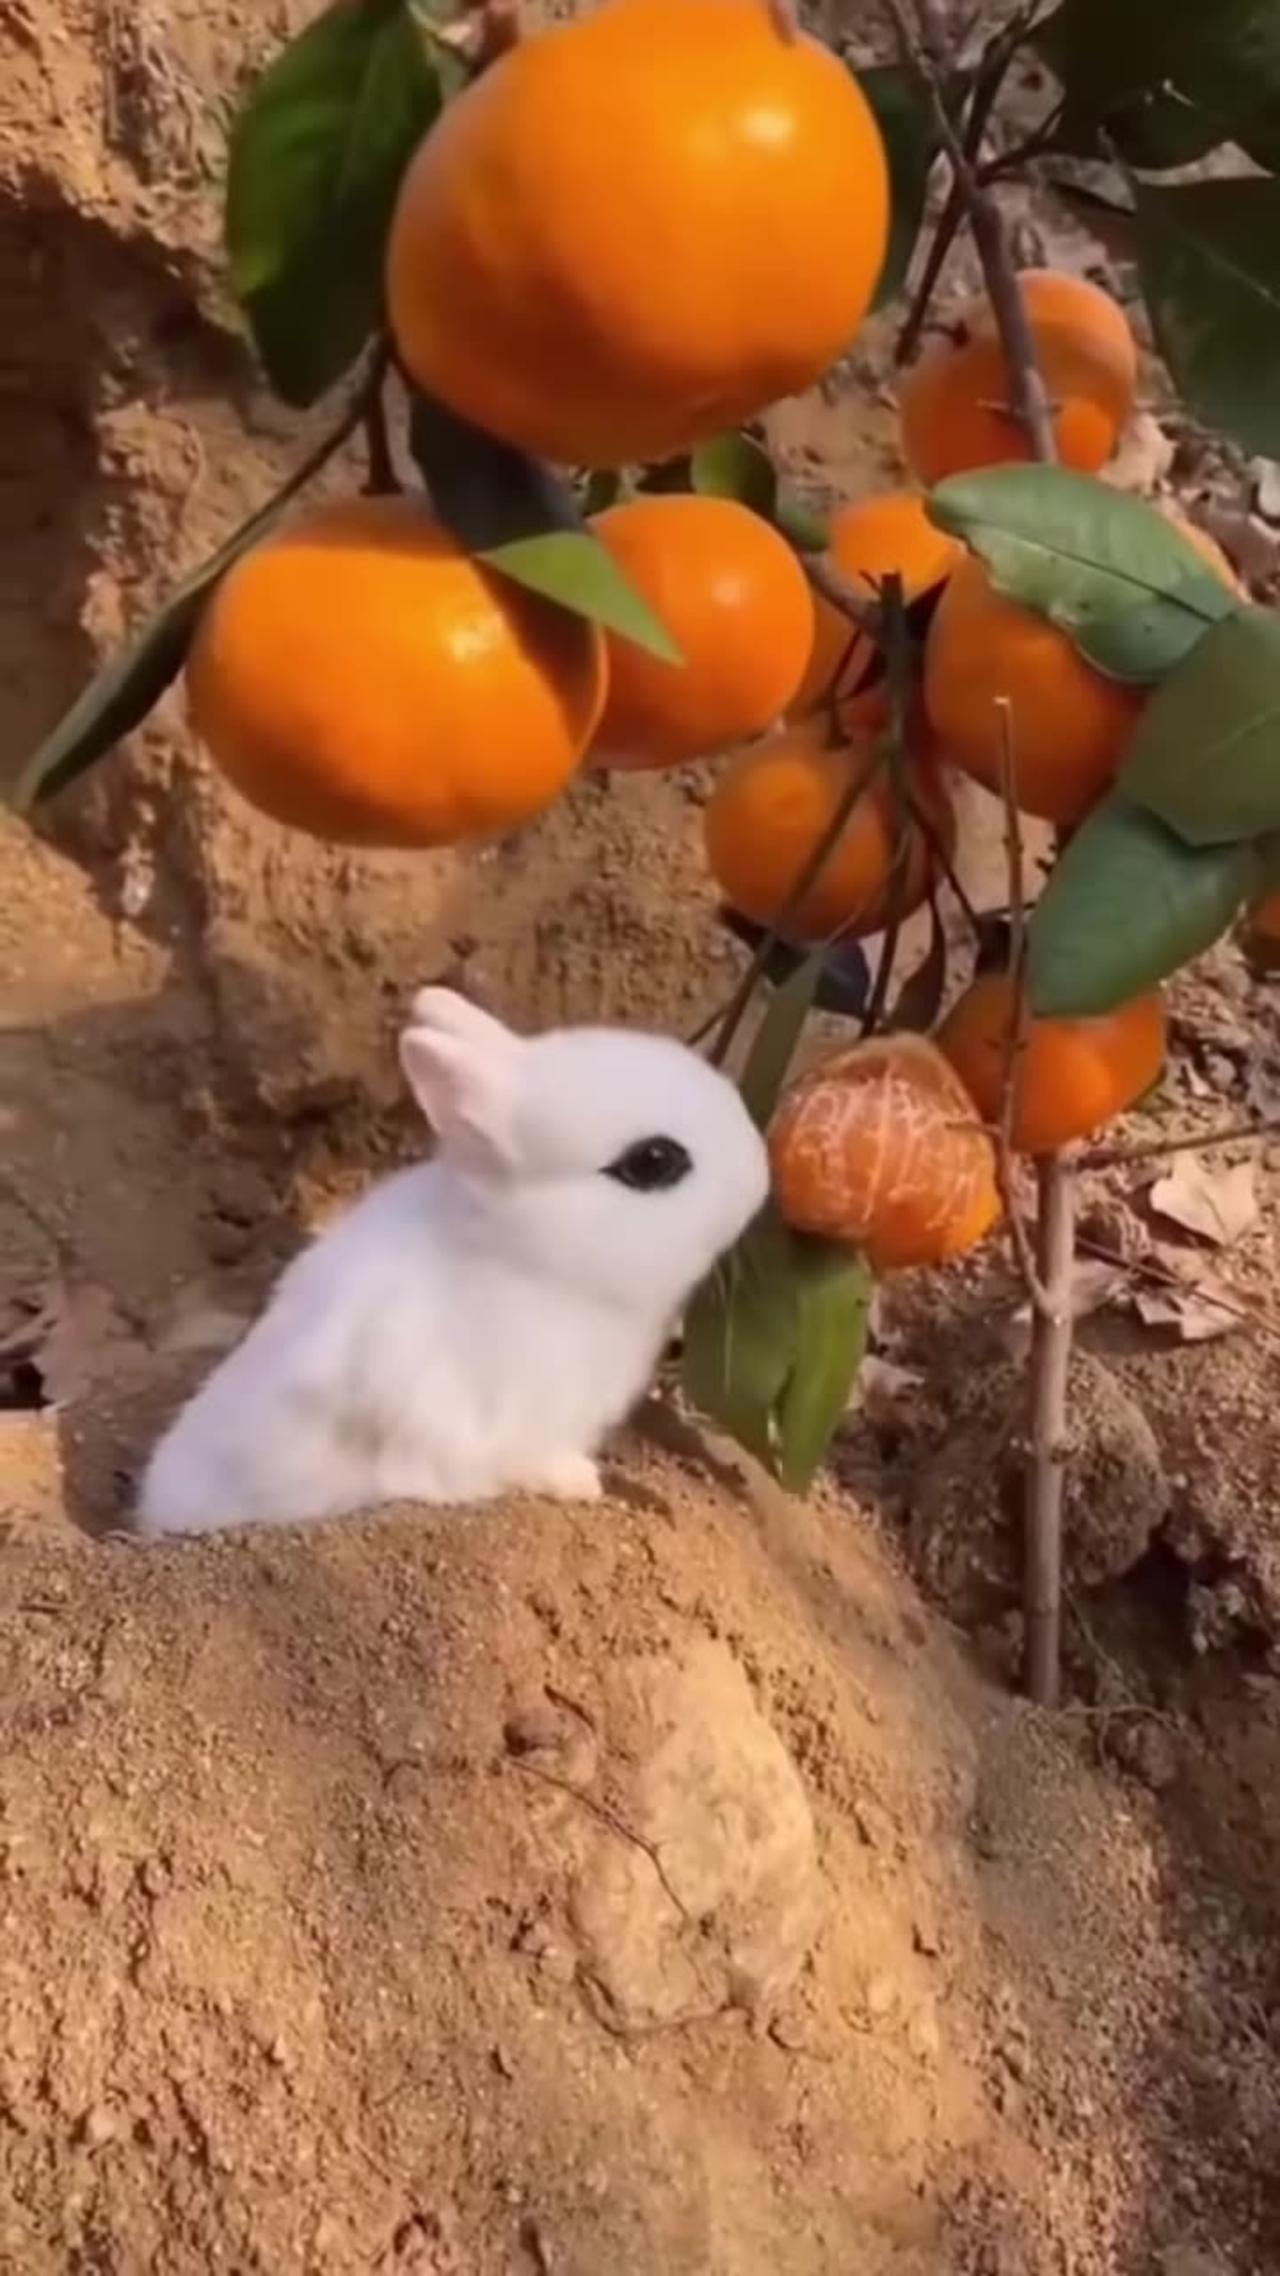 Best Funny Animal Of the Year (2023) so Cute!! enjoy watching